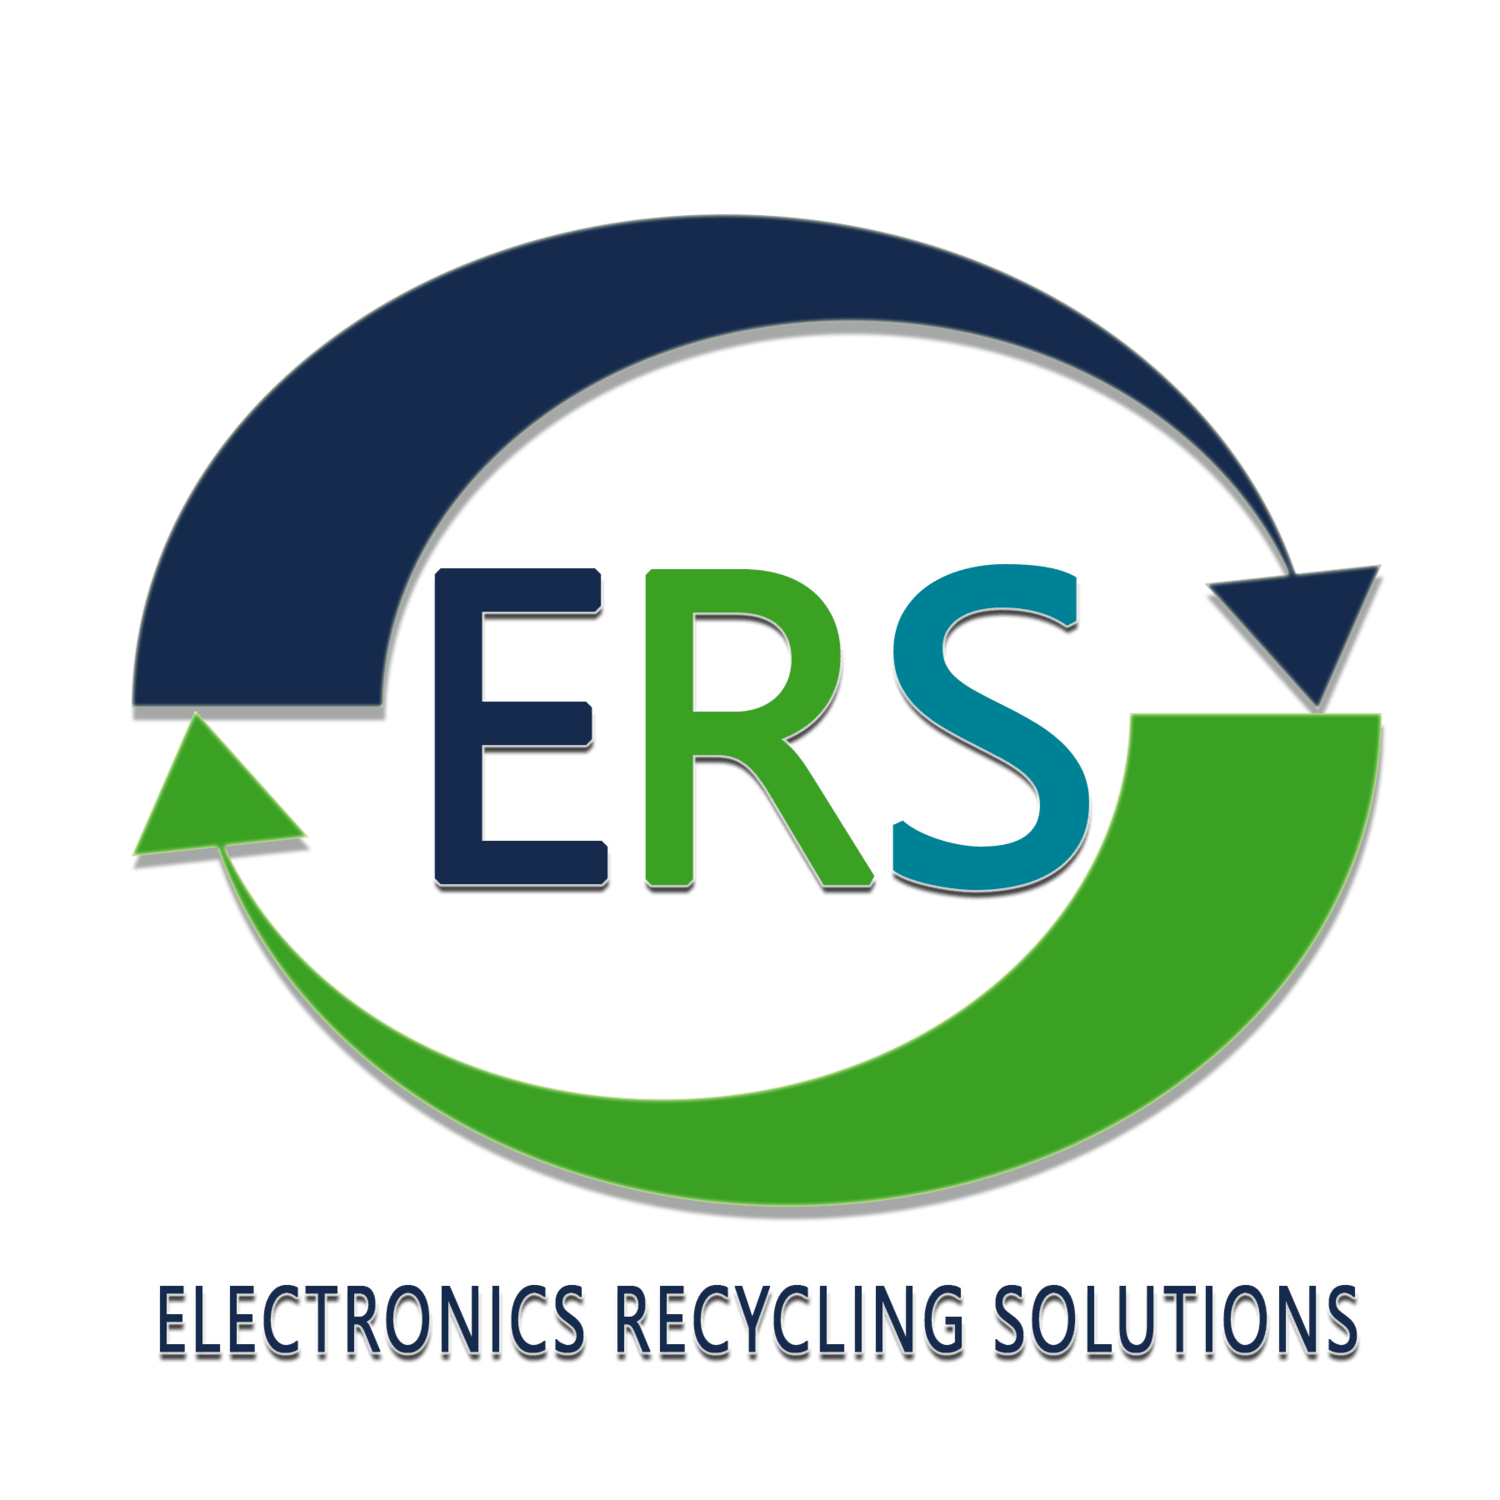 Ers Logo - Electronics Recycling Solutions | Jobs and Autism | Nashville Recycling